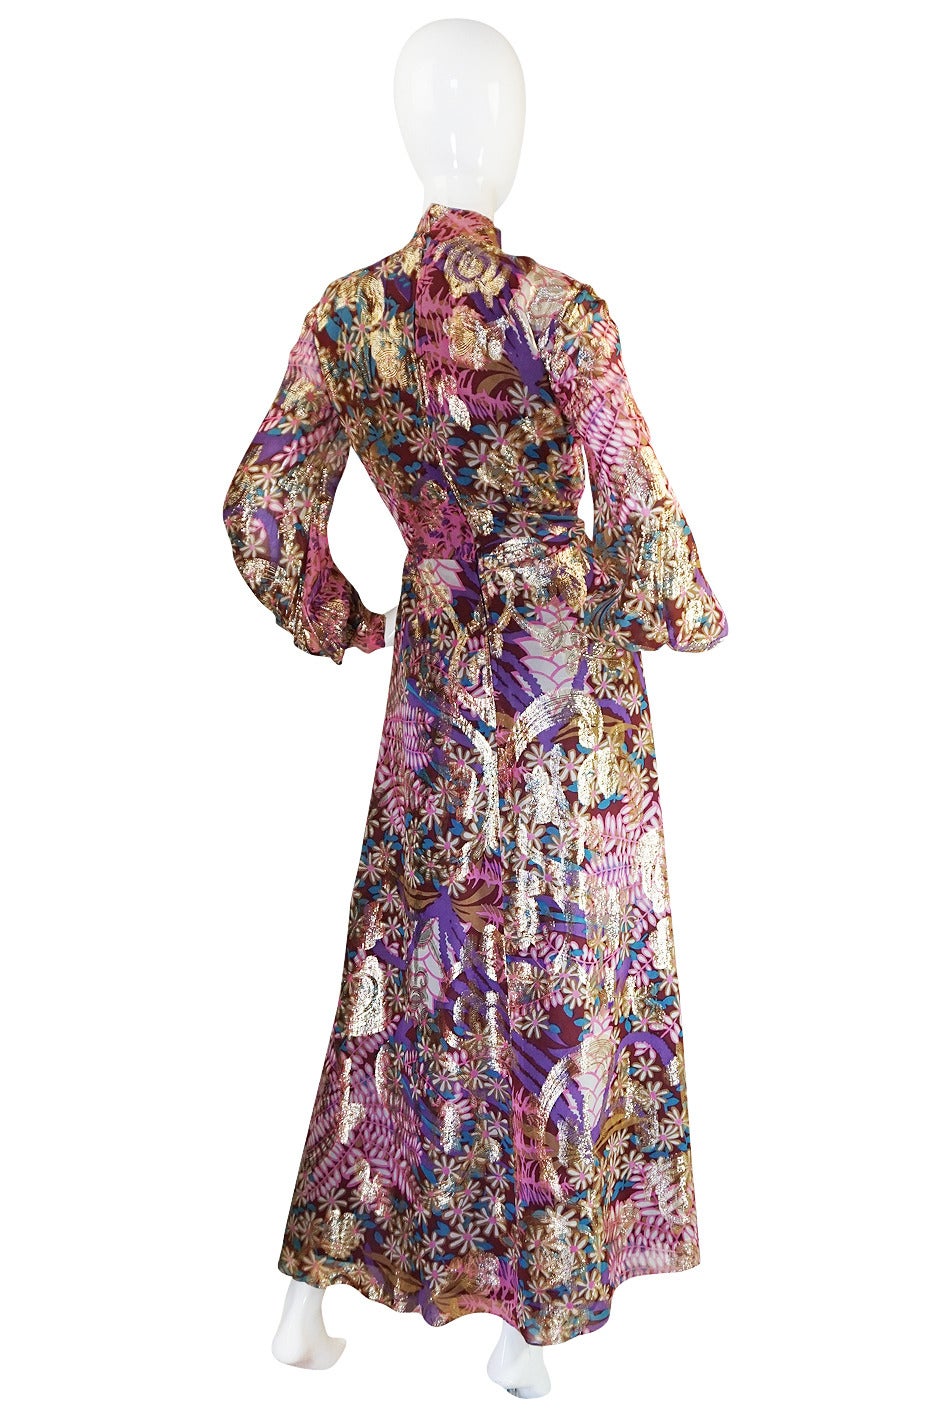 This is such an amazing dress. It is made by Malcolm Starr and it is a stunning example of why we love this label. The silk chiffon base is a pretty combination of pinks and shades of purple mixed together masterfully in a leaf and floral print.